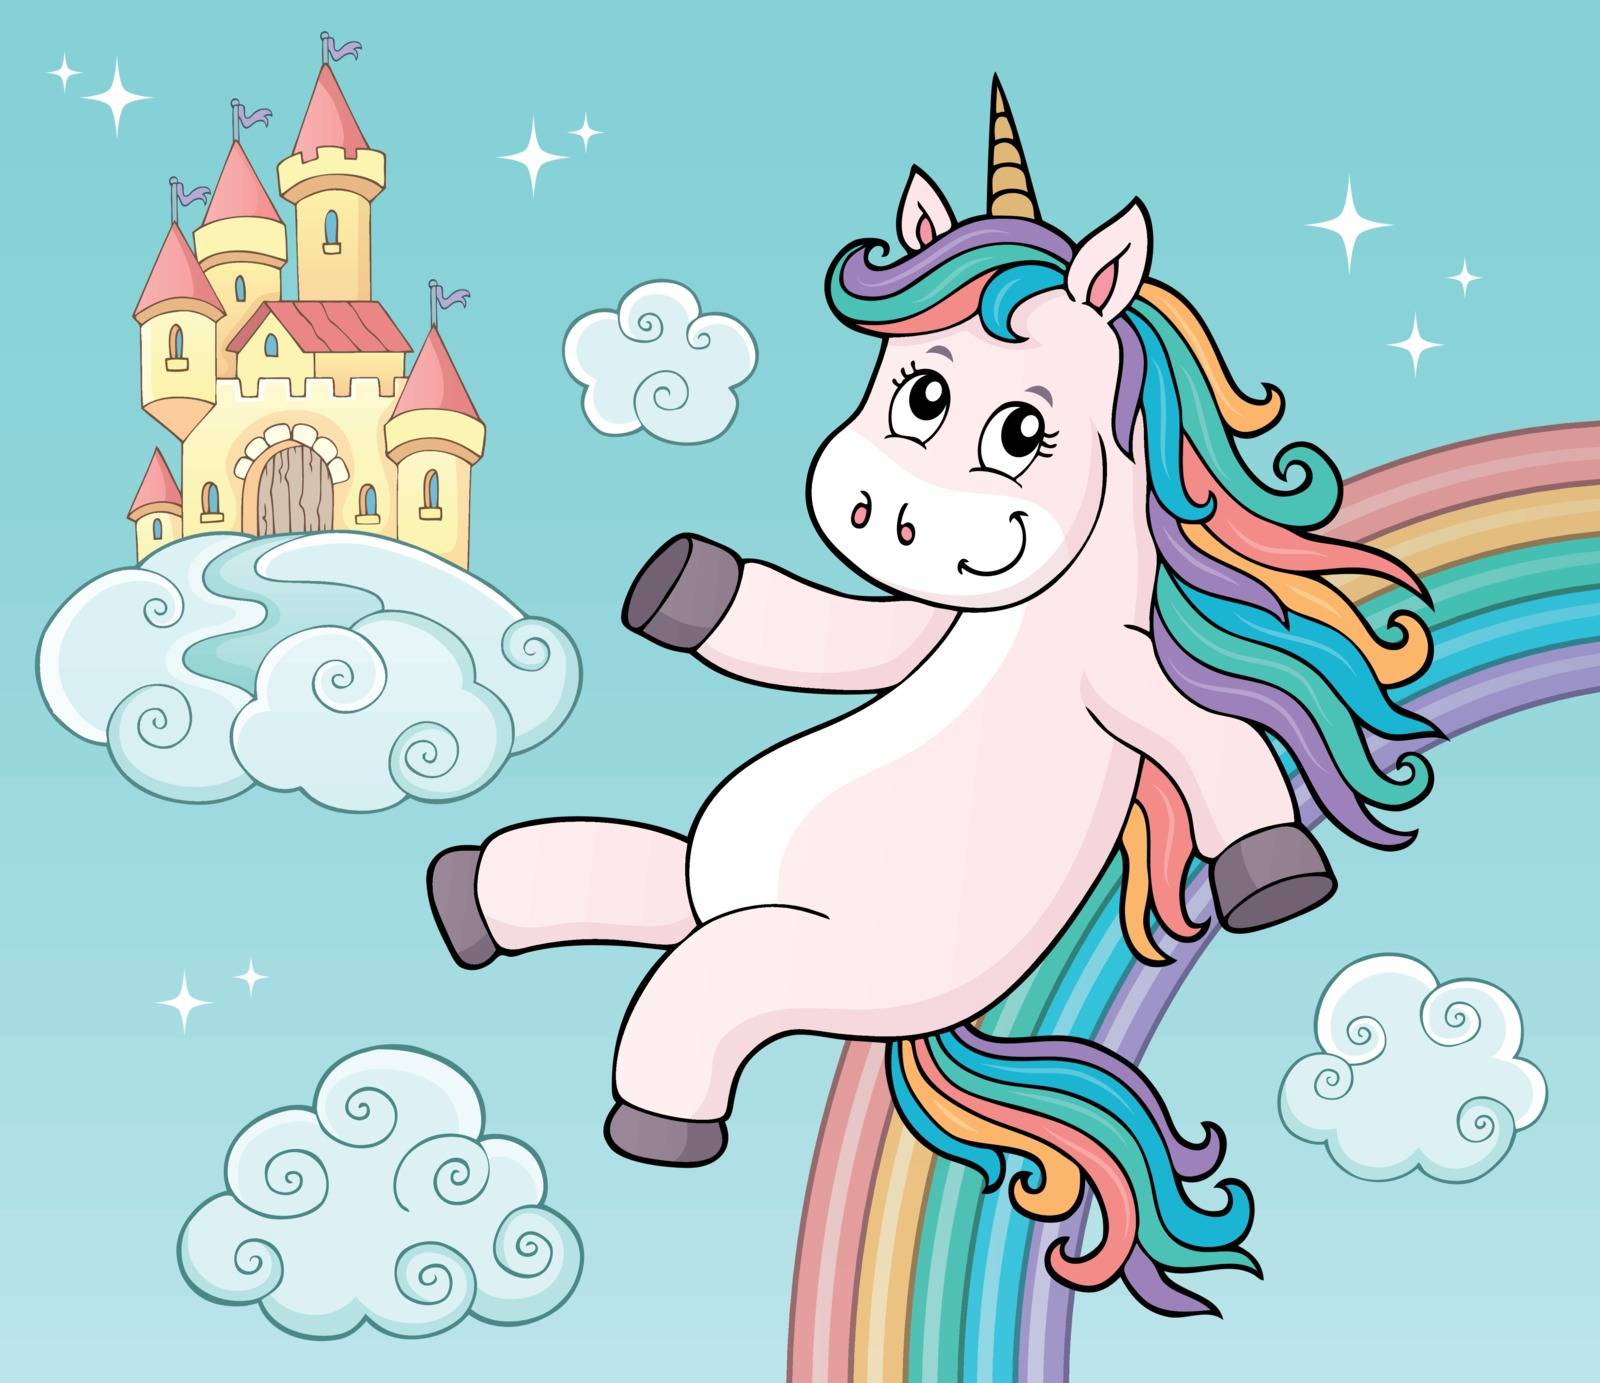 Cute unicorn topic image 5 by clairev